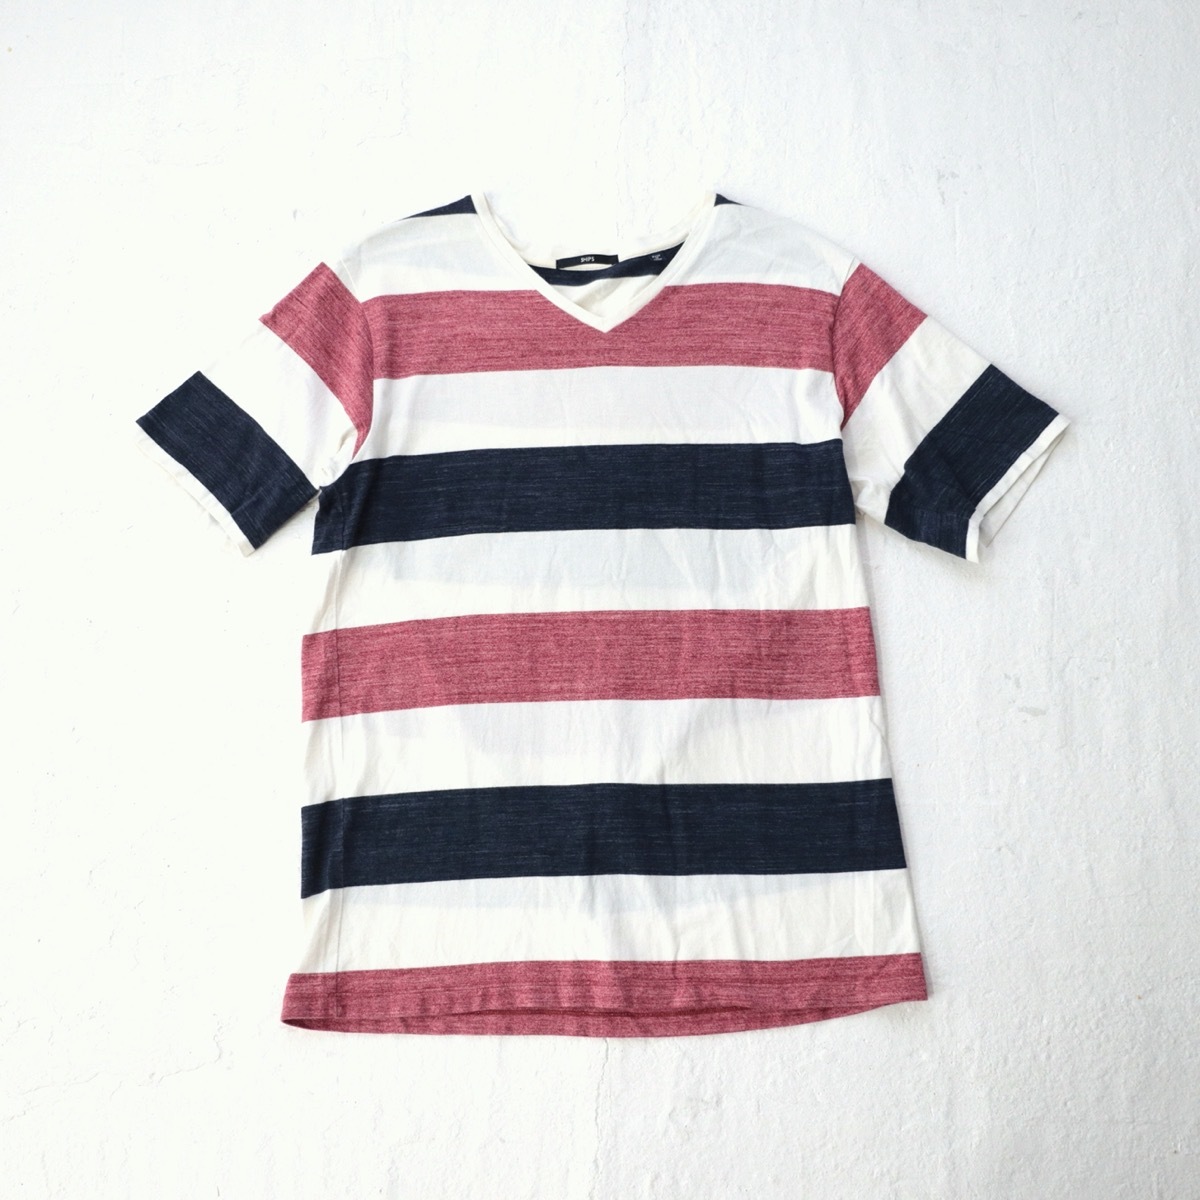 [ free shipping ]SHIPSl Ships MADE IN JAPAN border V neck T-shirt tricolor size L made in Japan 